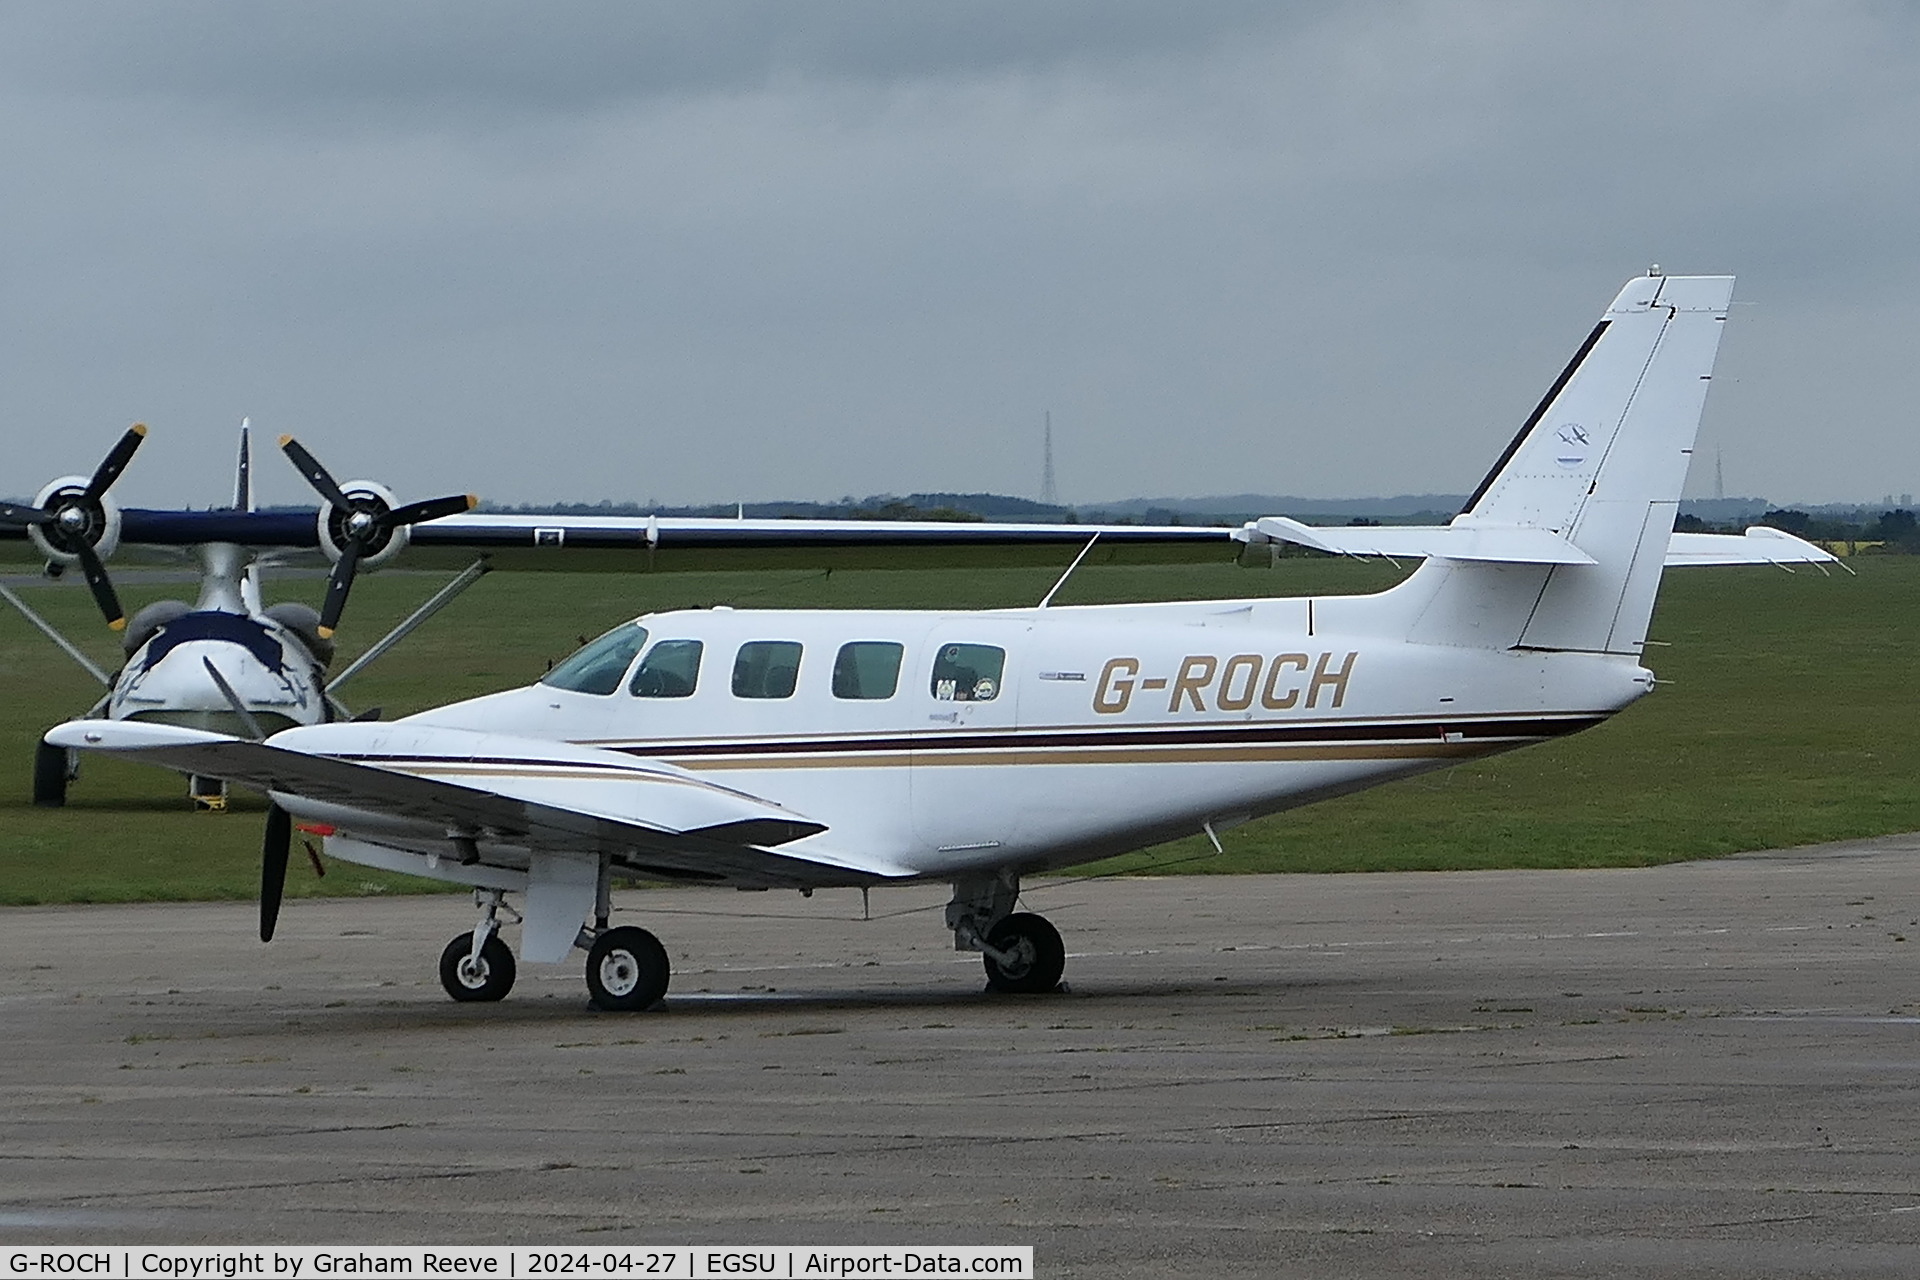 G-ROCH, , Parked at Duxford.